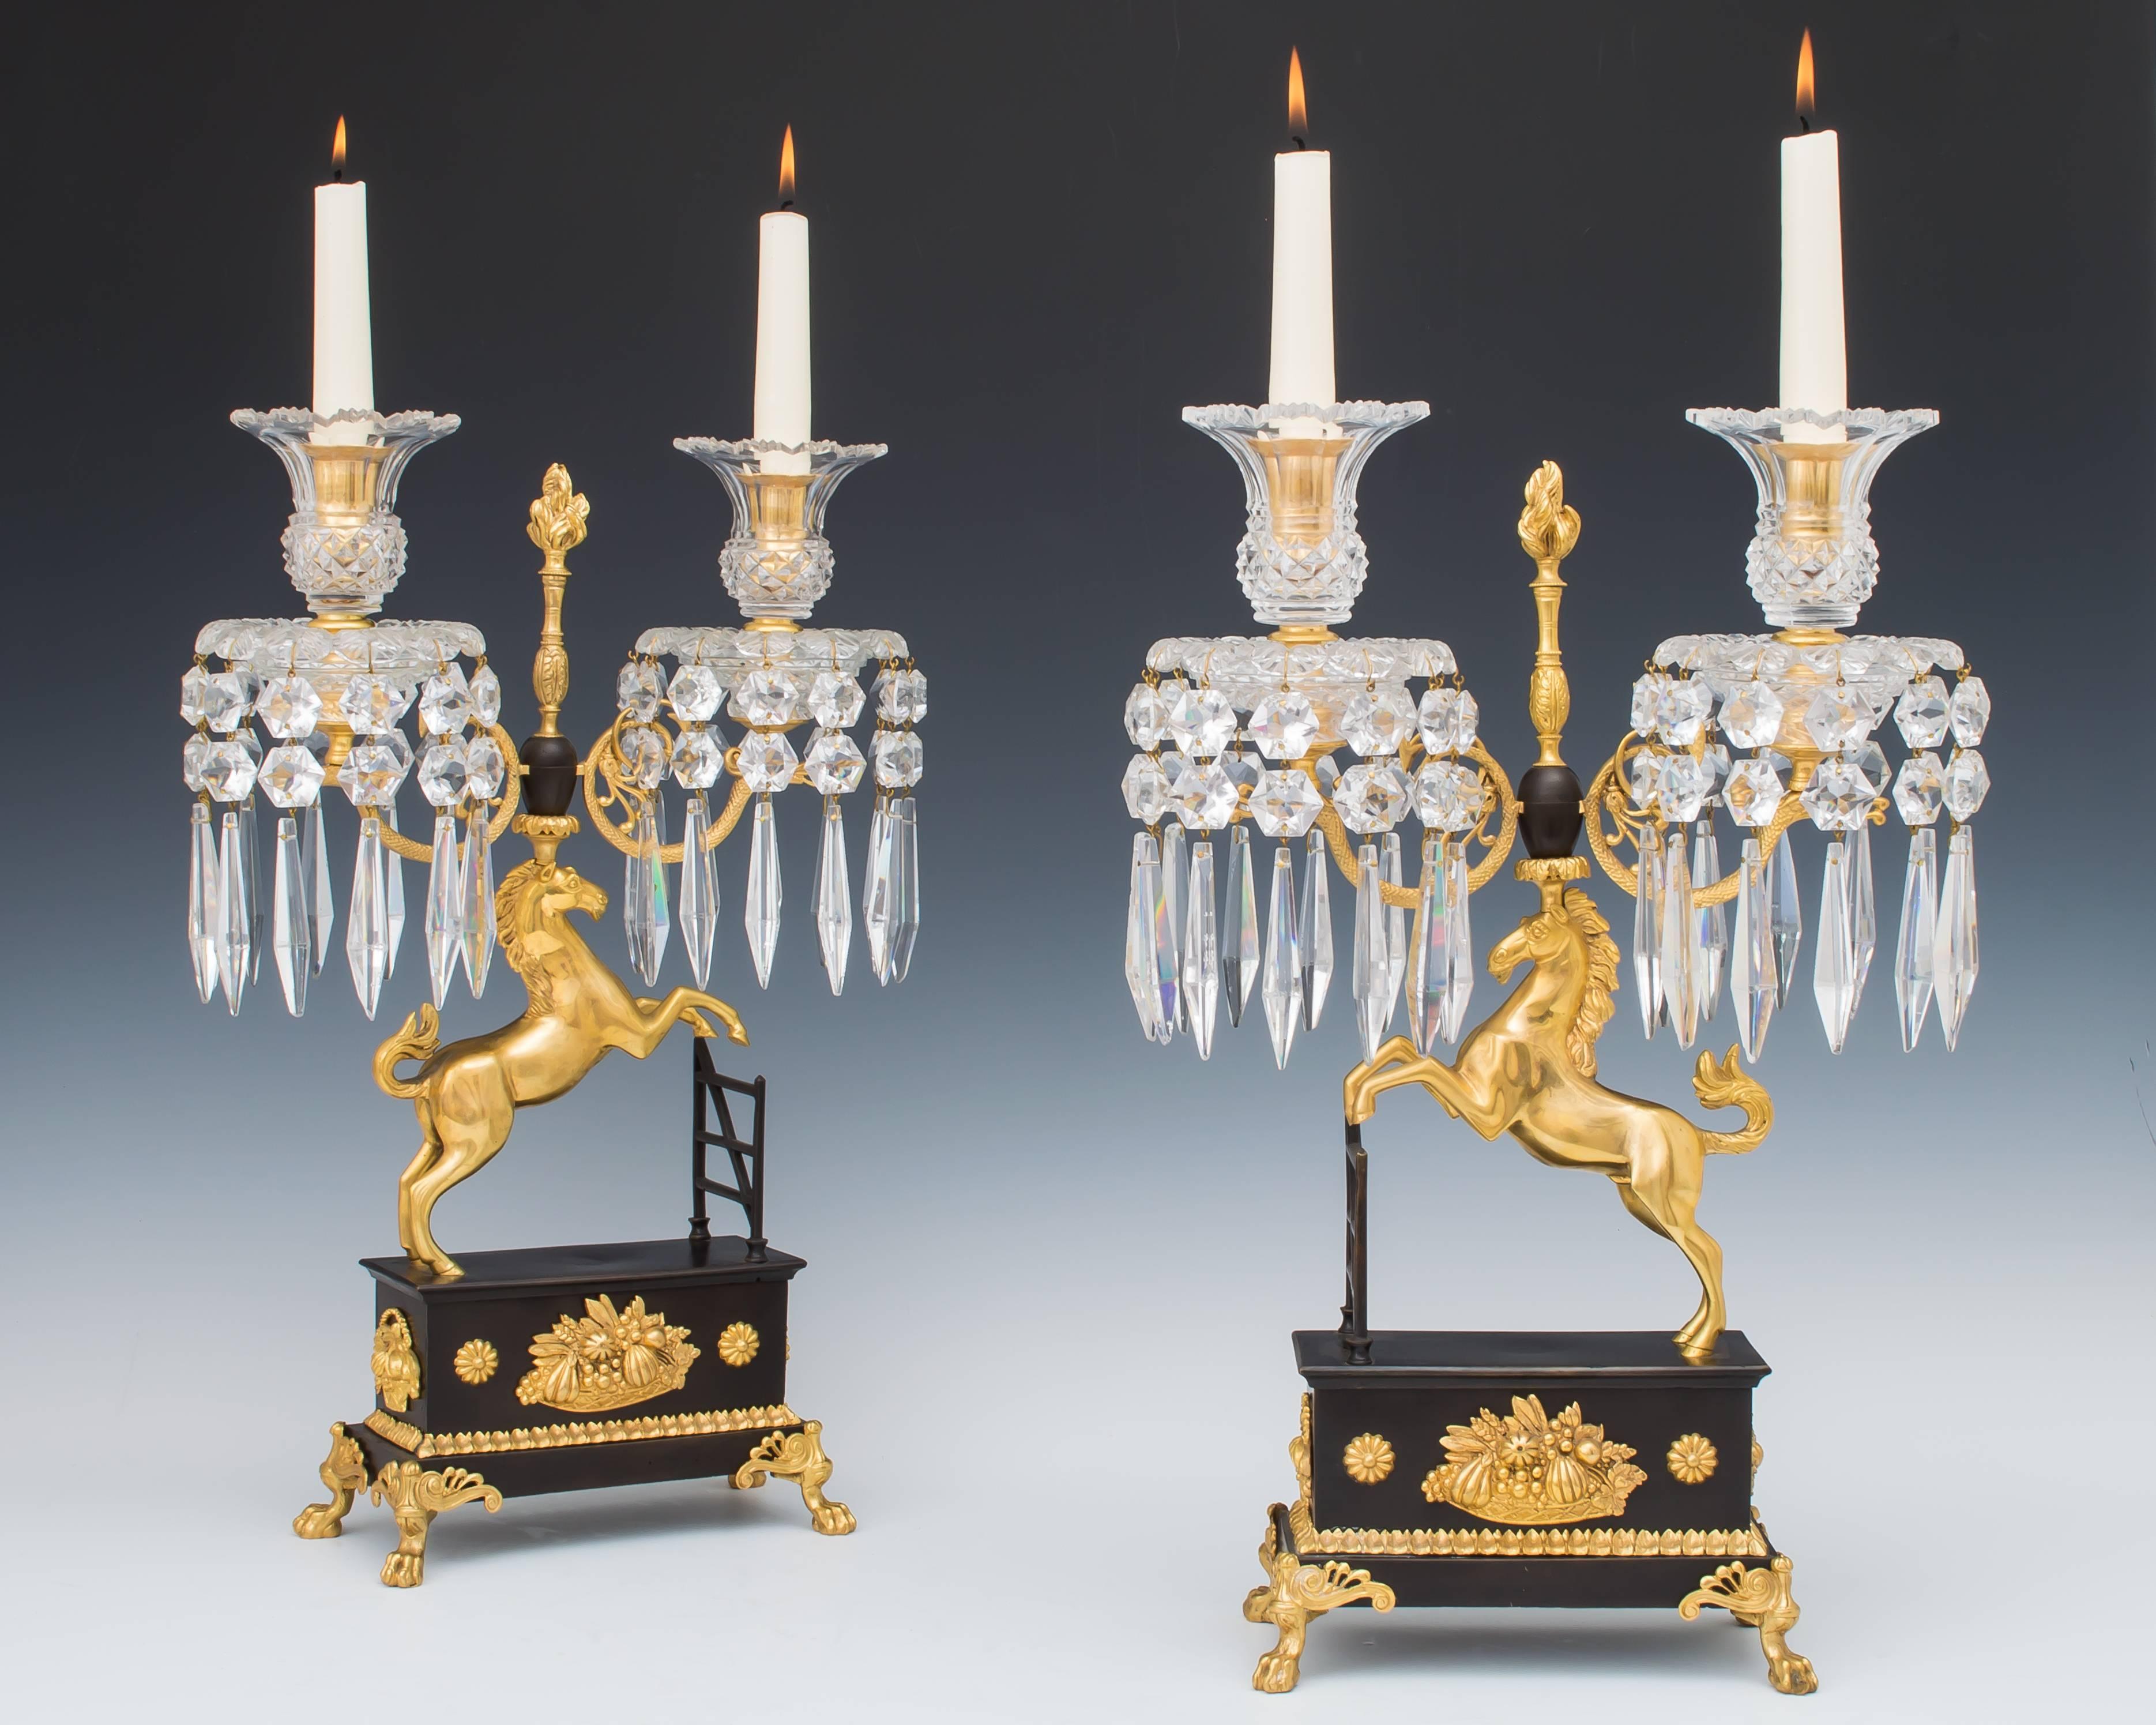 An unusual pair of Regency period ormolu and bronze mounted cut-glass candelabra the bronzed rectangle bases are finely mounted with lion paw feet, basket of fruit and flowers these bases surmounted with a gilt horse jumping towards a bronzed gate